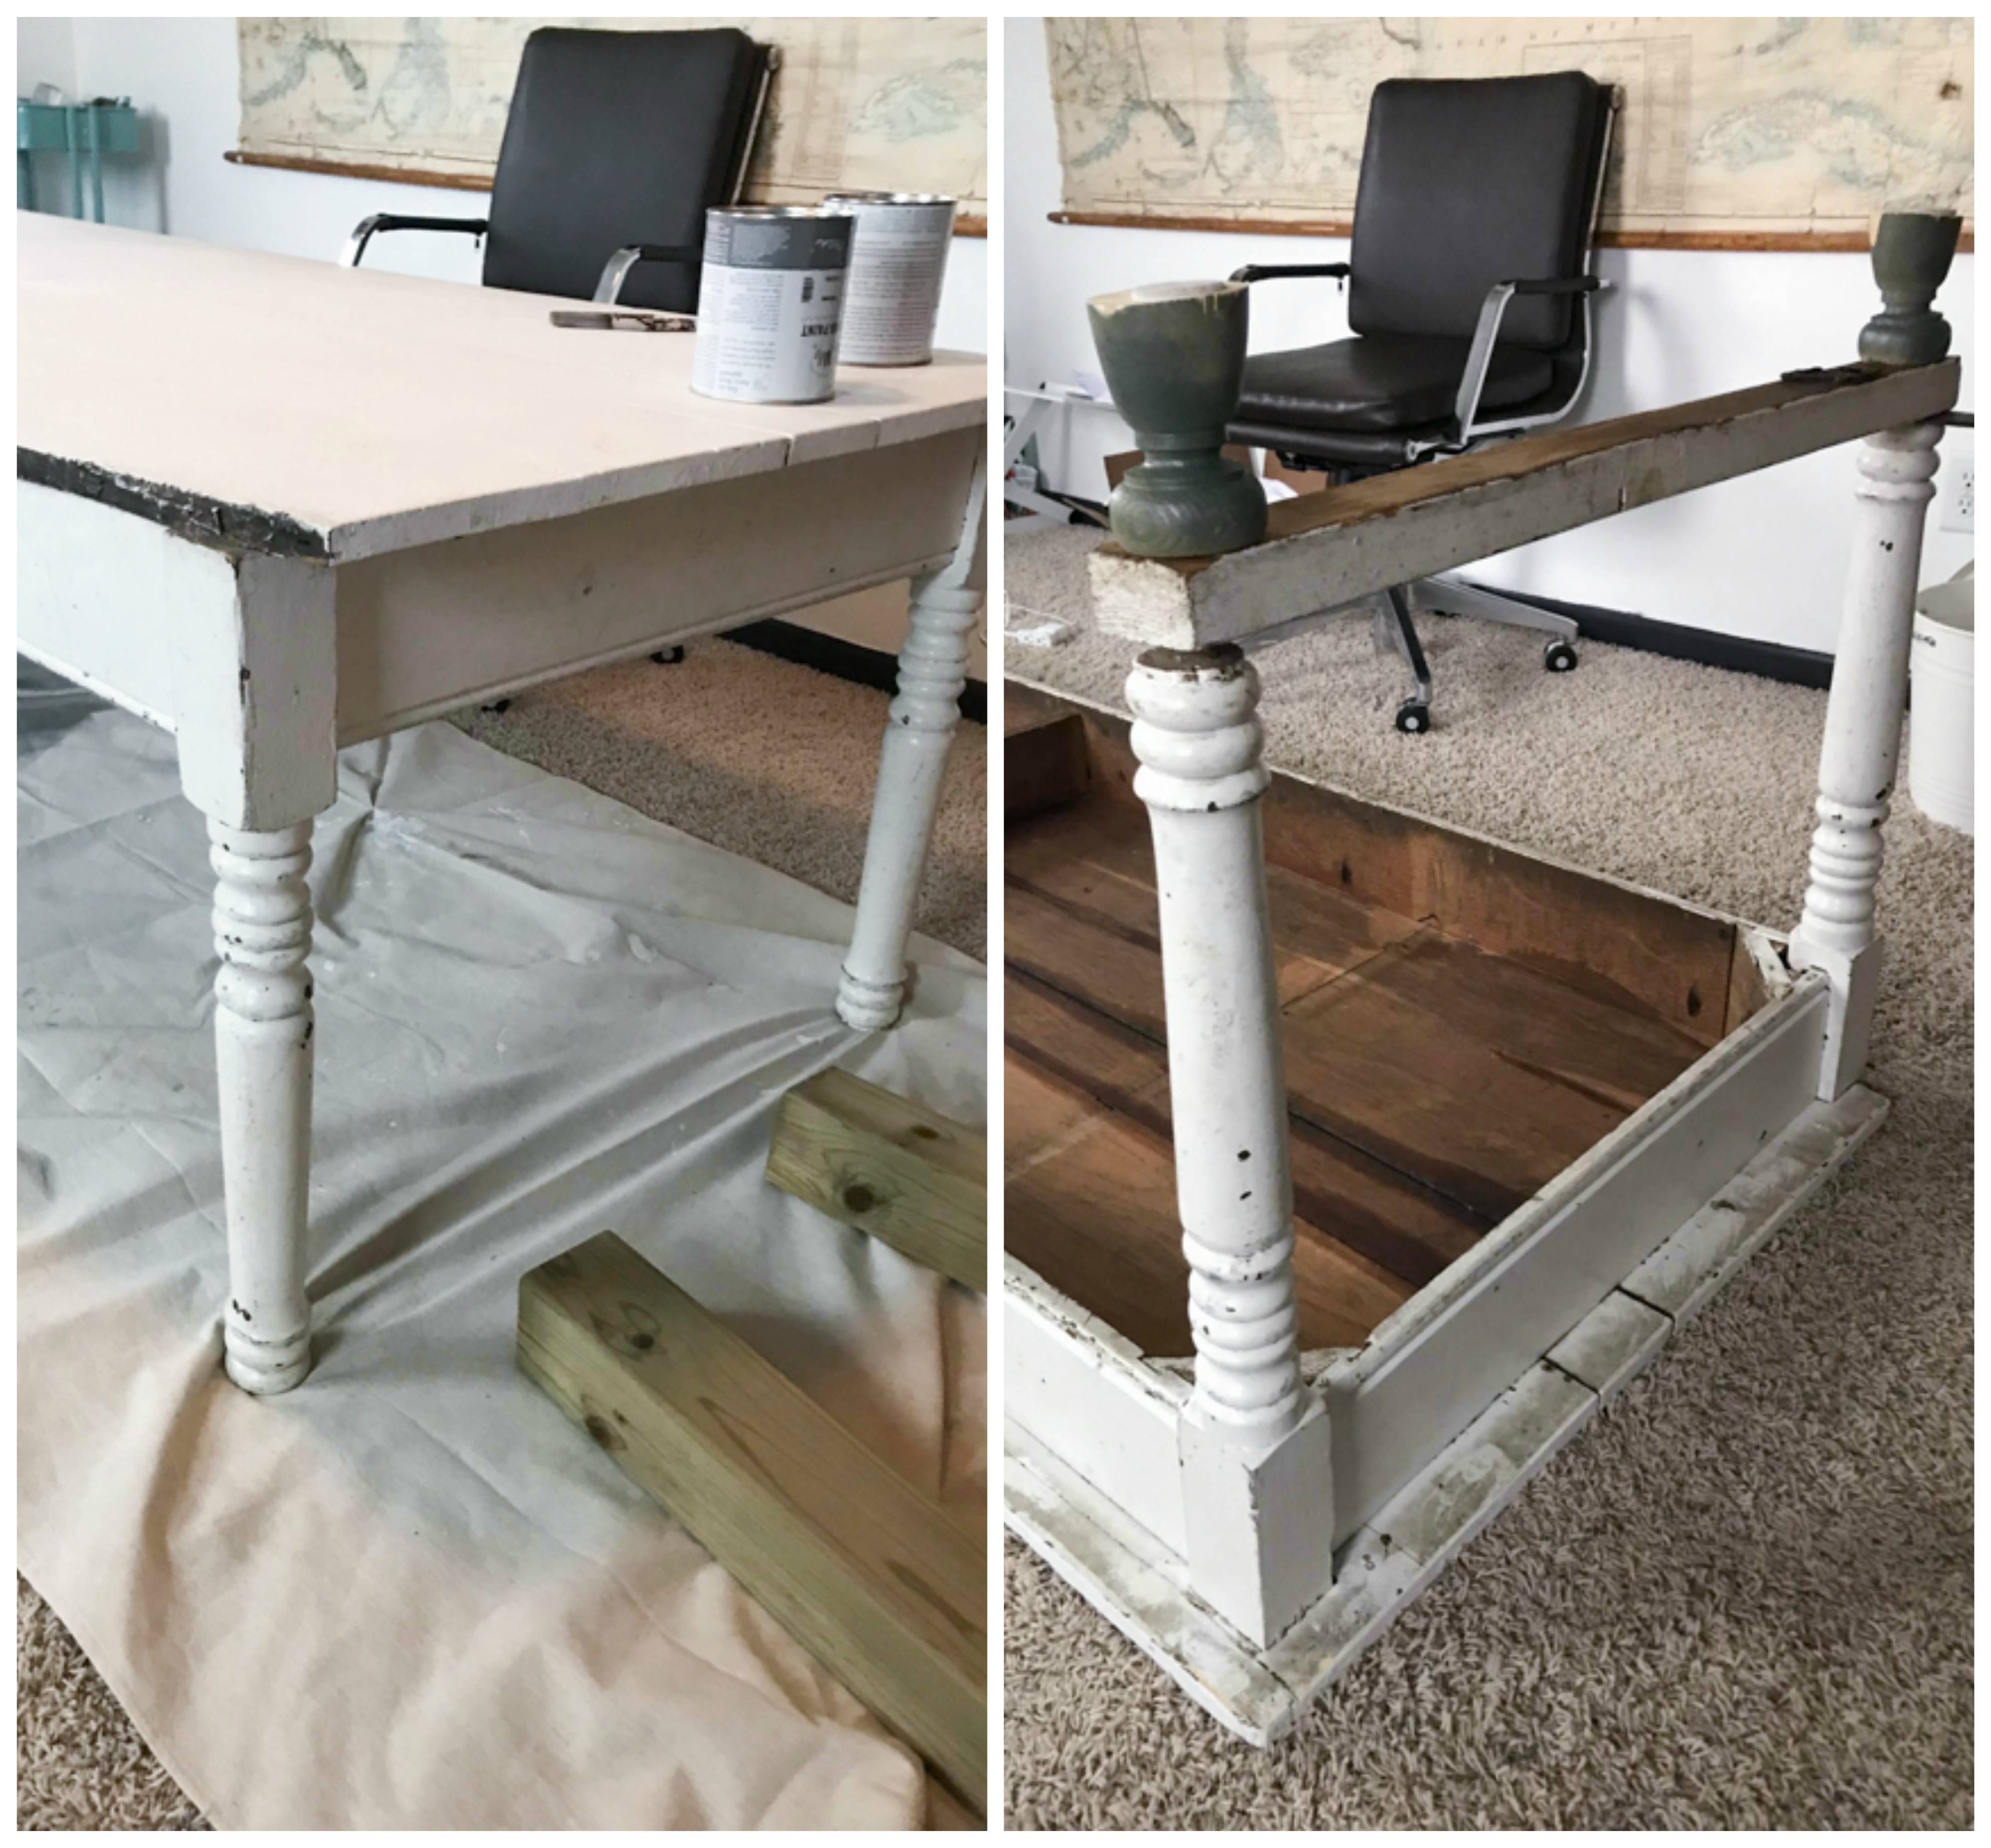 An old harvest table is updated and used as a home office desk.